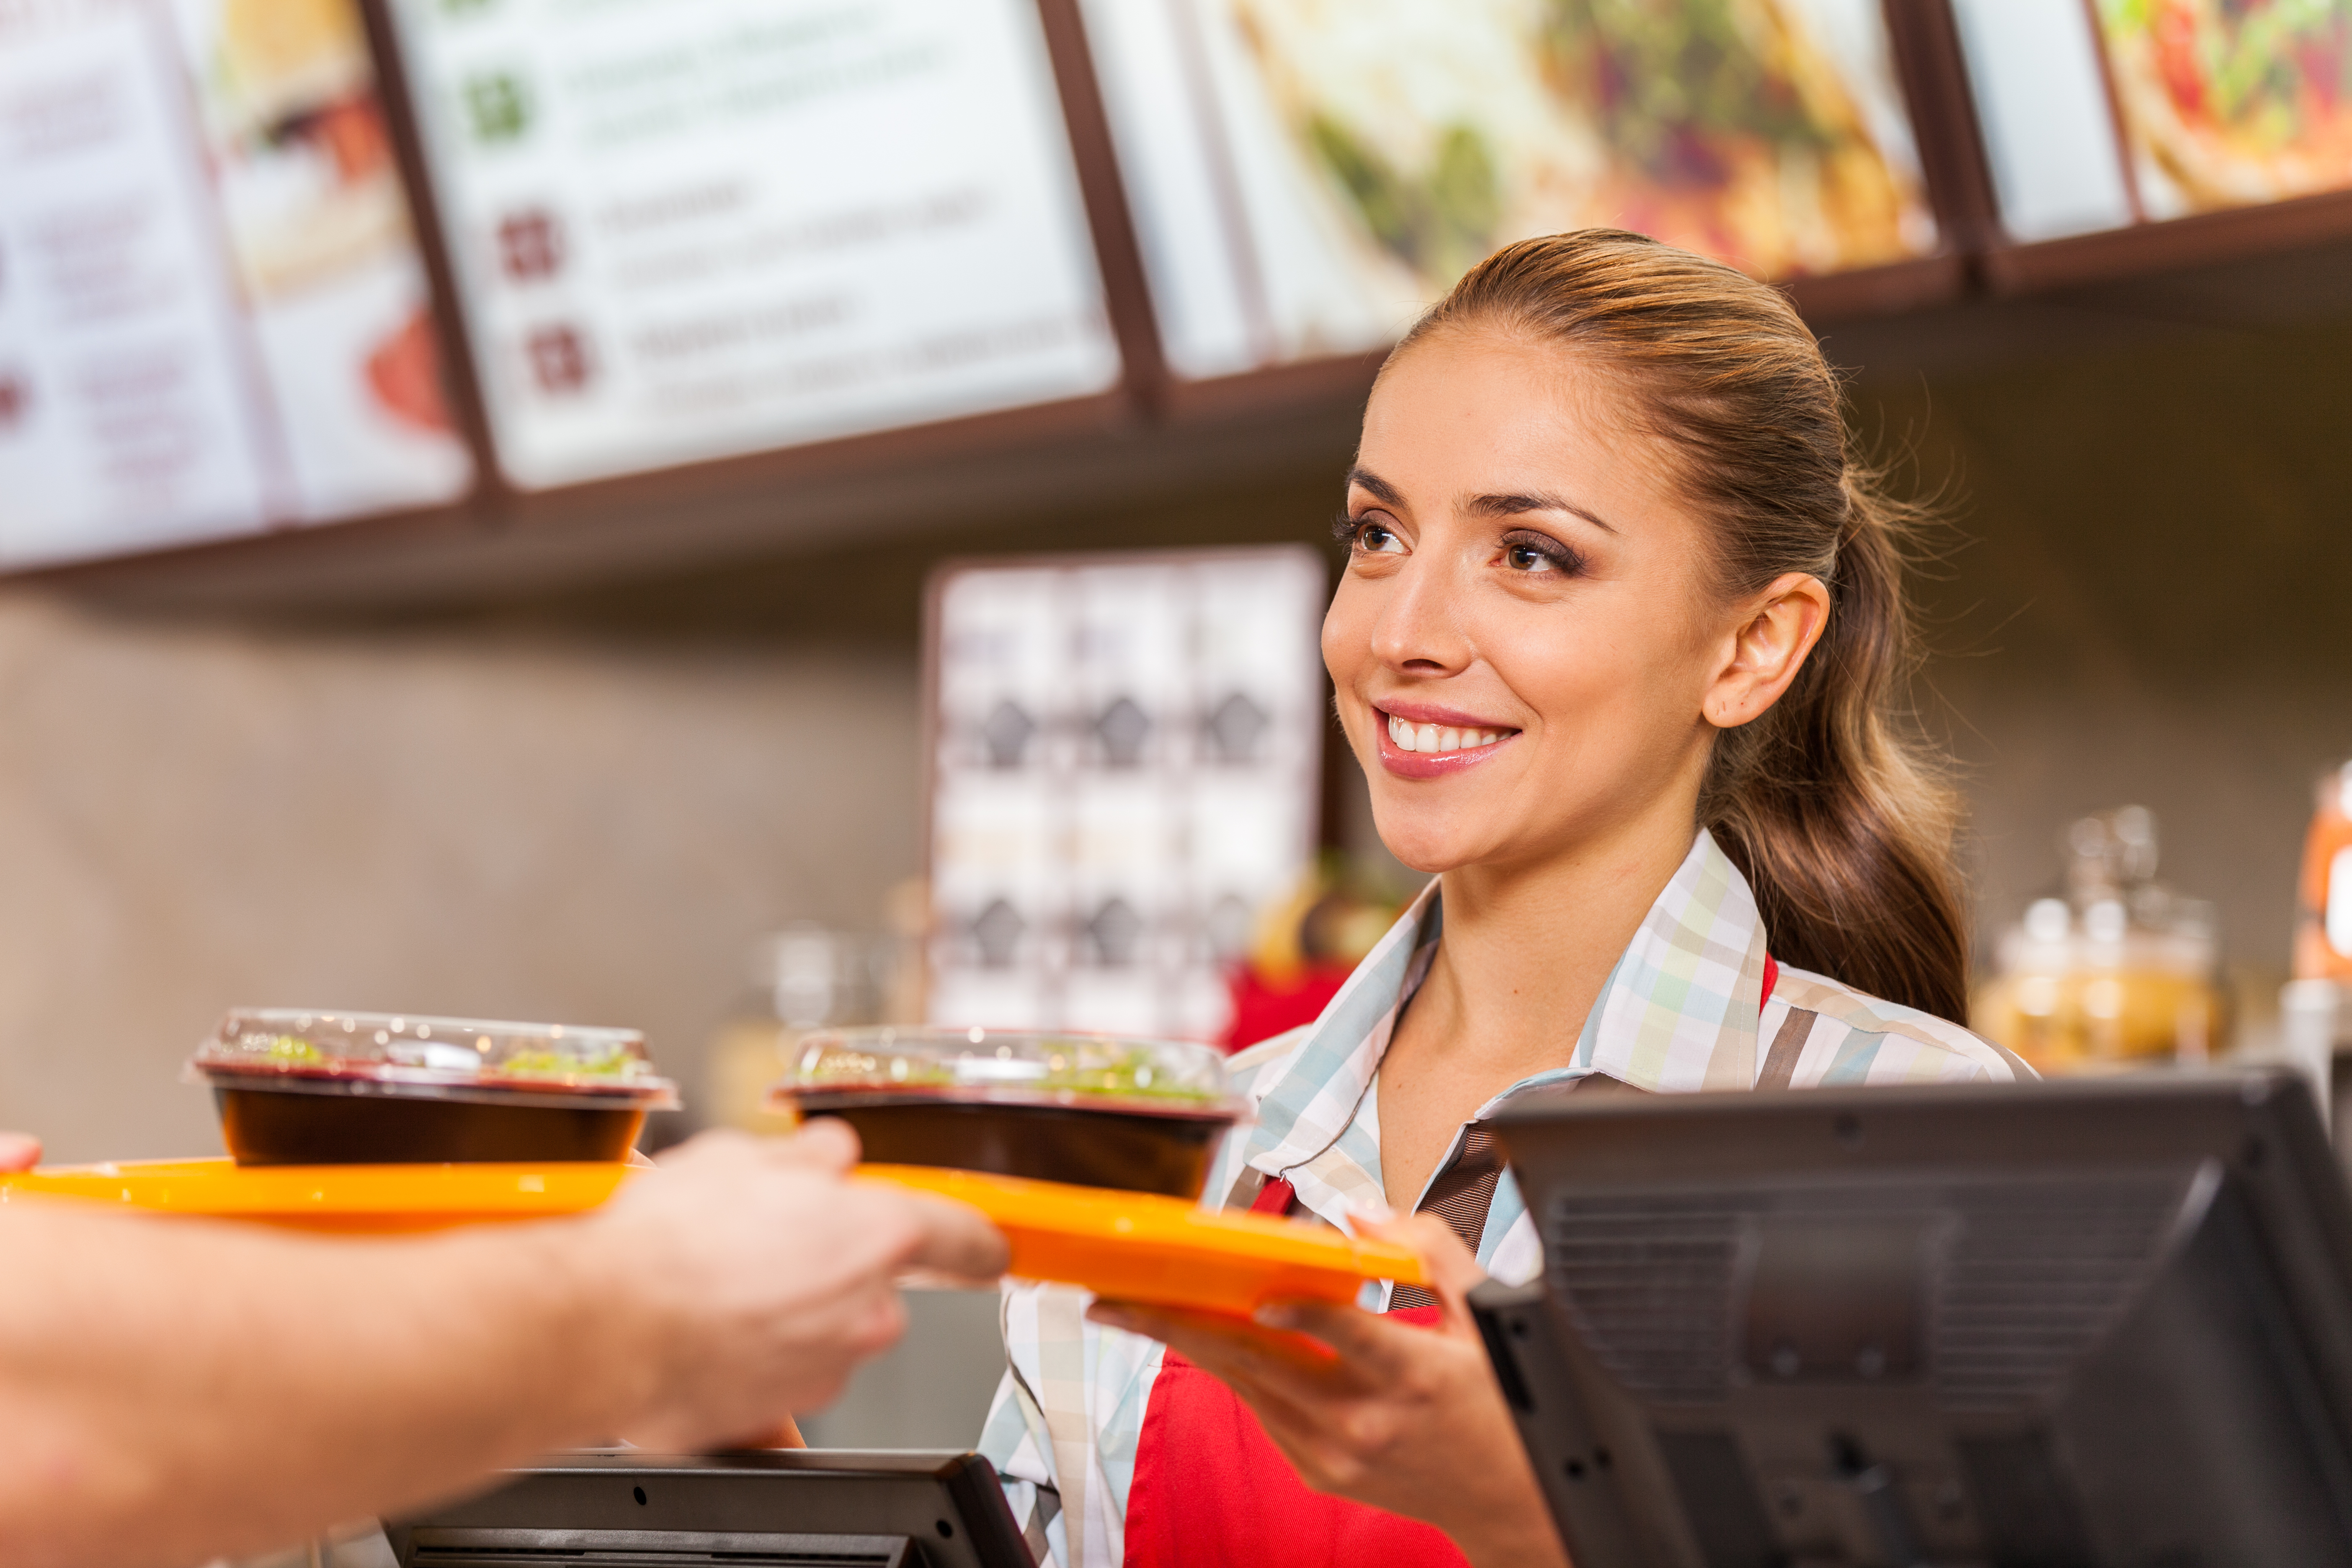 A waitress handing over some fast food | Source: Shutterstock